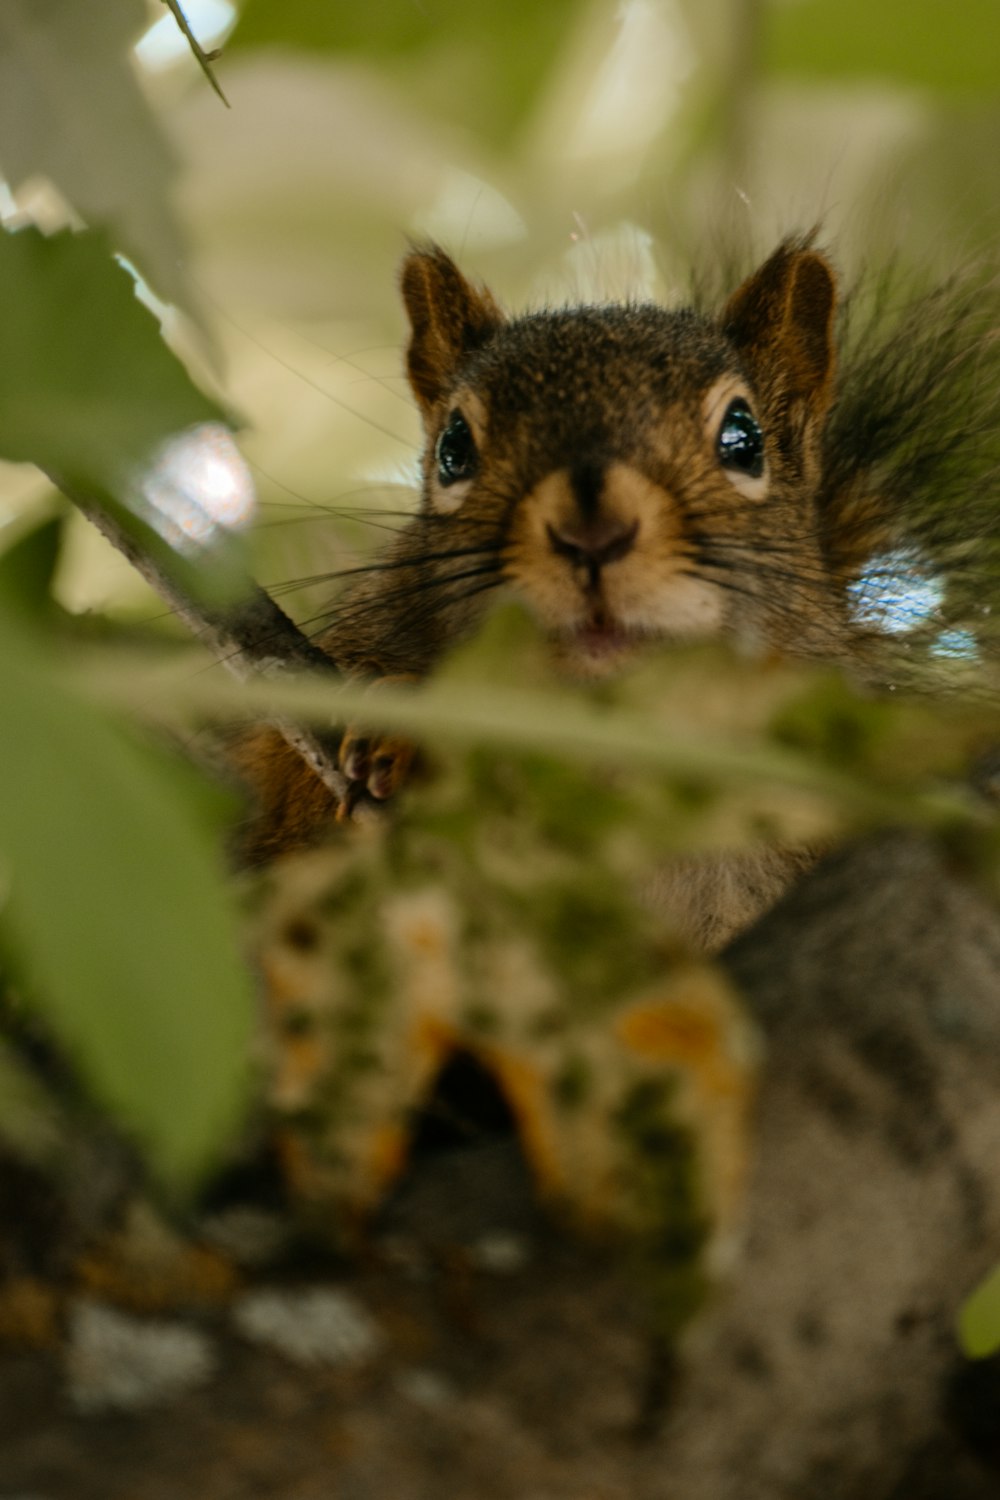 a close up of a squirrel on a tree branch